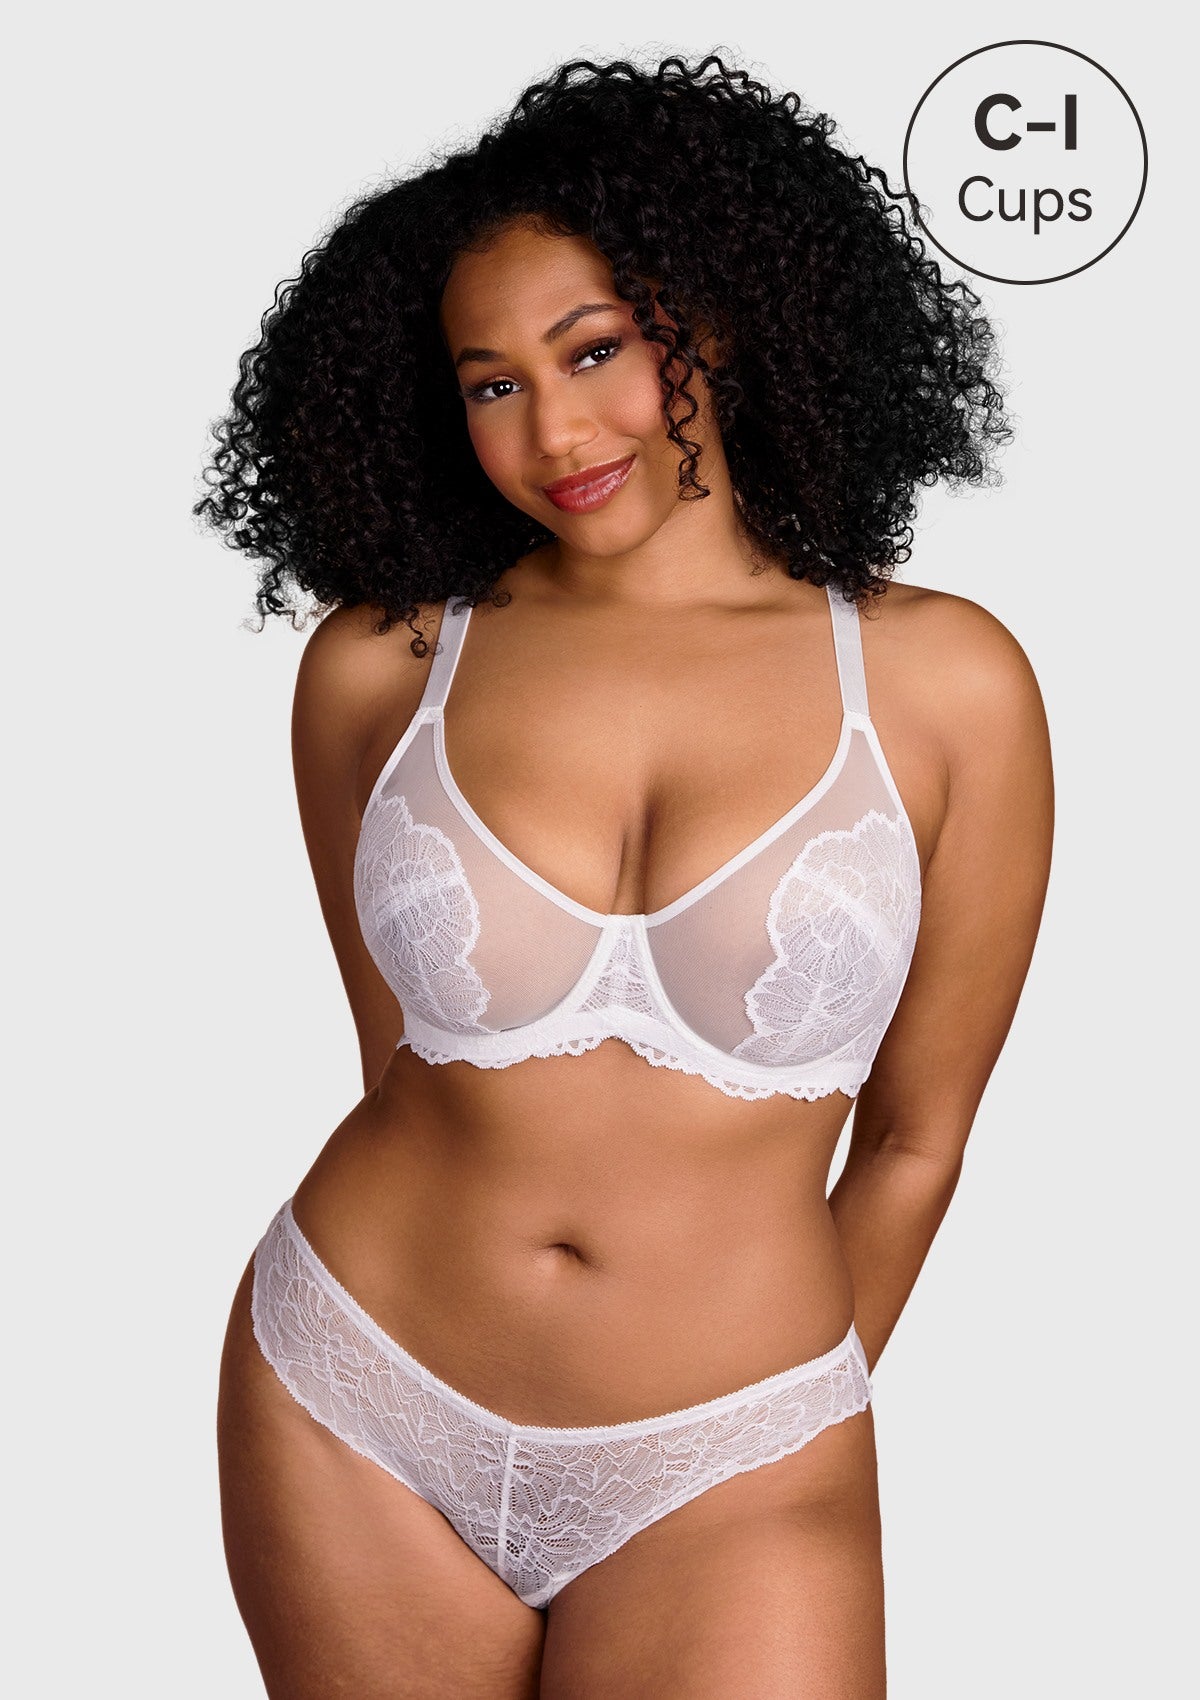 HSIA Blossom Bestseller Unlined Underwire Lace Bra - White / 40 / DDD/F